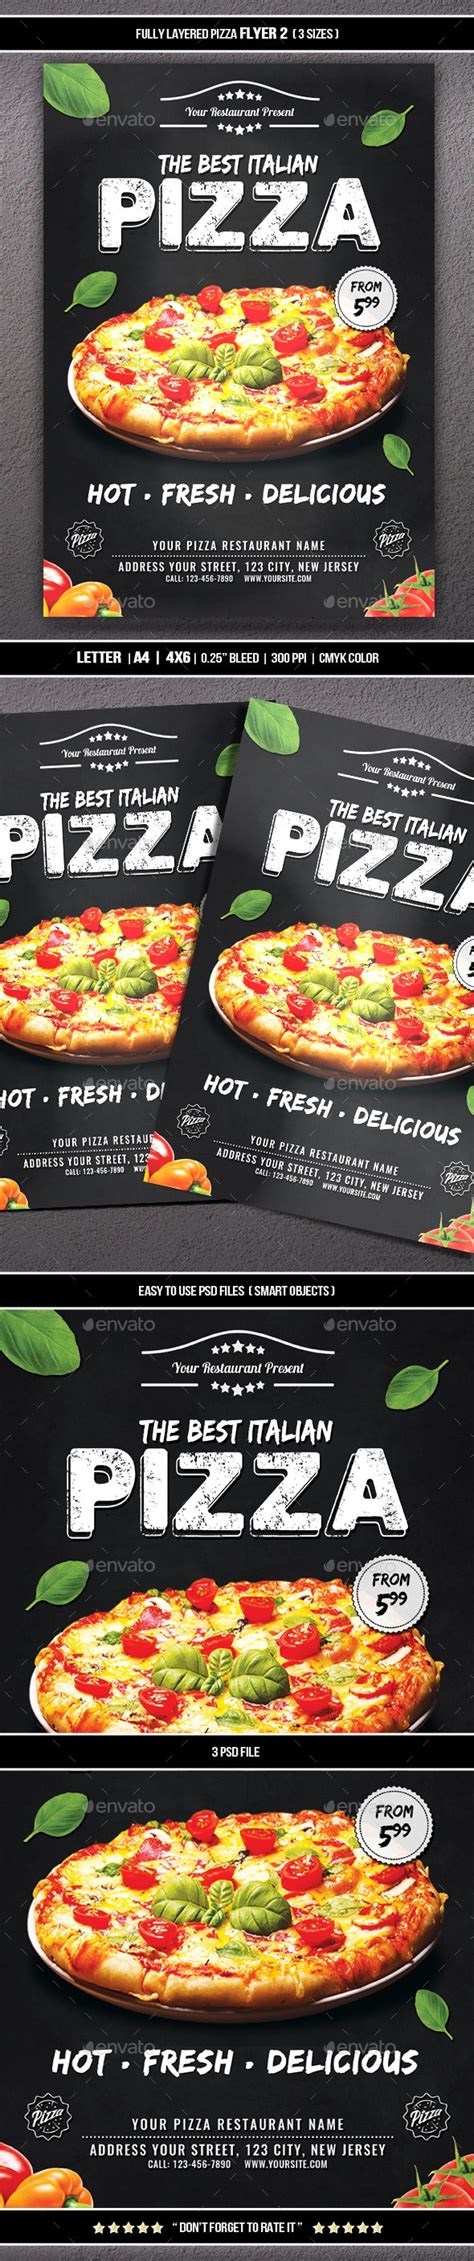 Pizza Flyer 2 By Mograsol Graphicriver